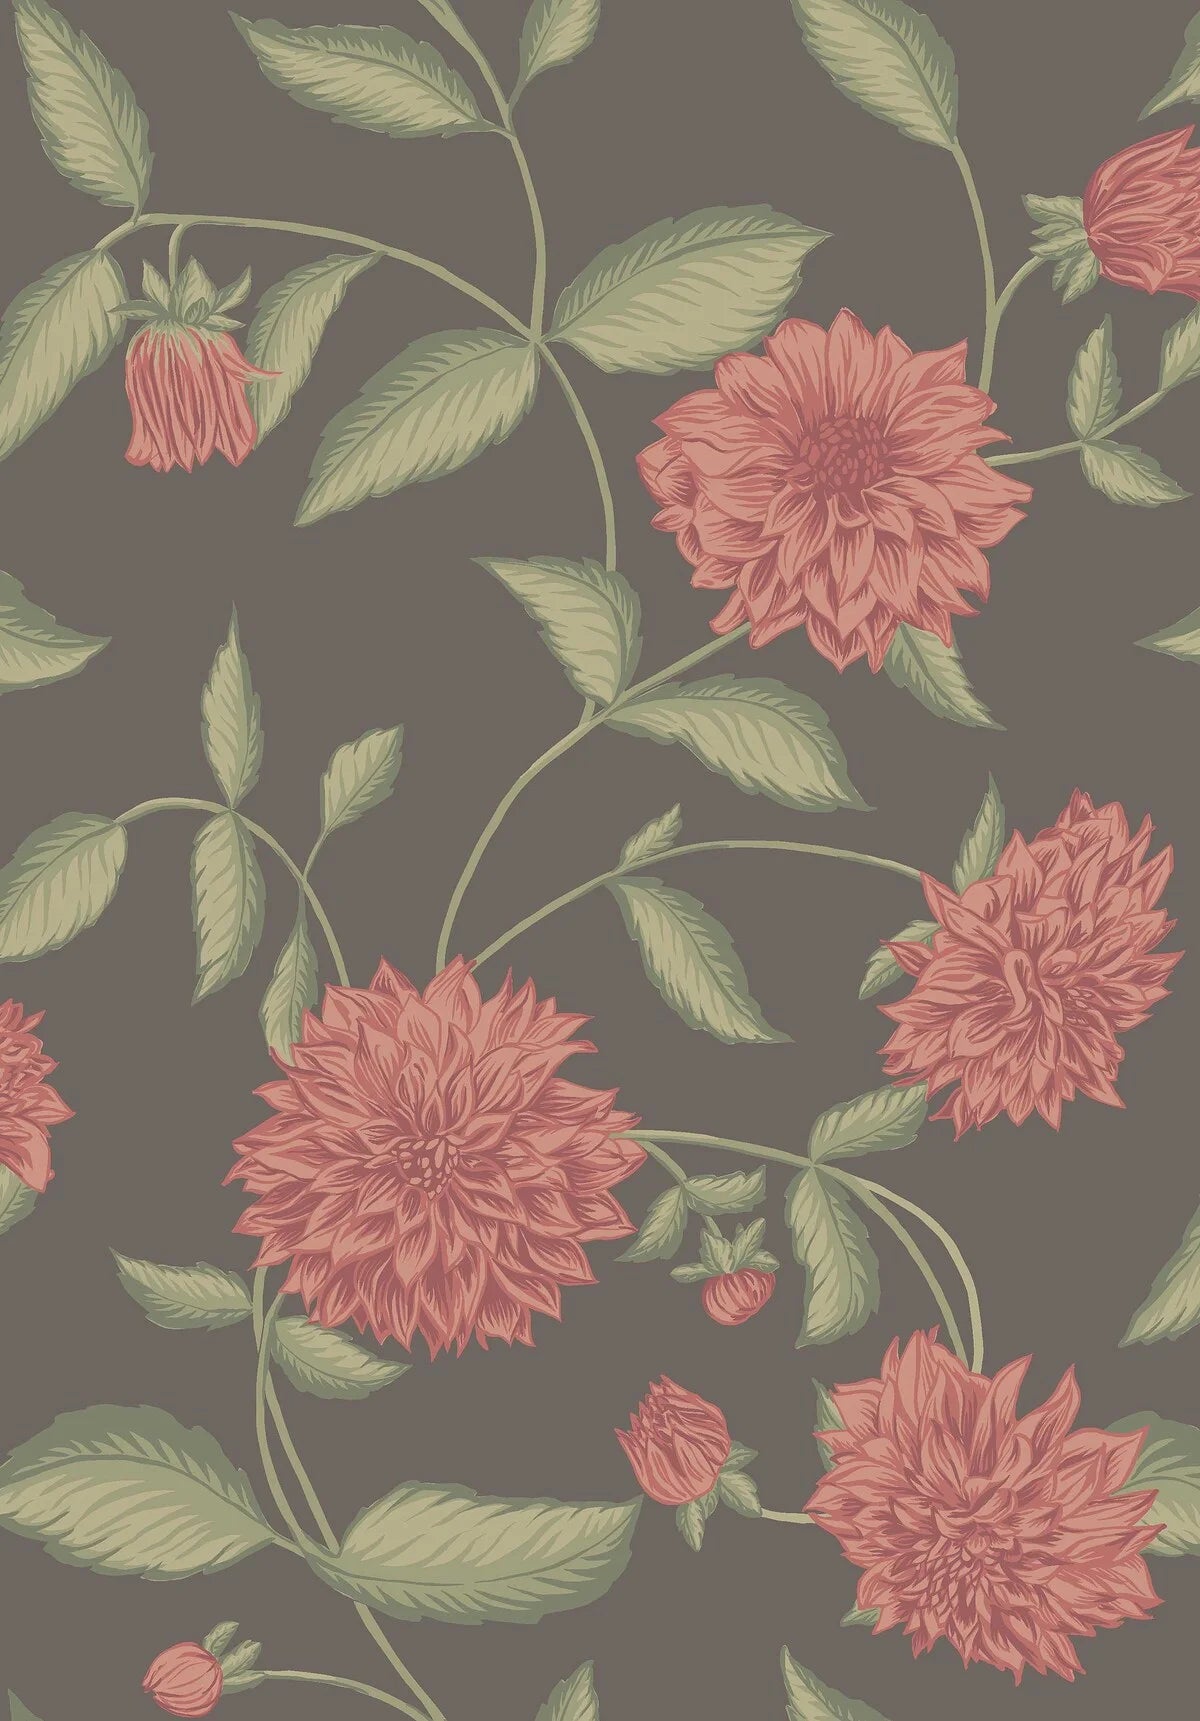 Immerse yourself in the allure of our Dahliadröm wallpaper designed by Ulrica Hurtig.